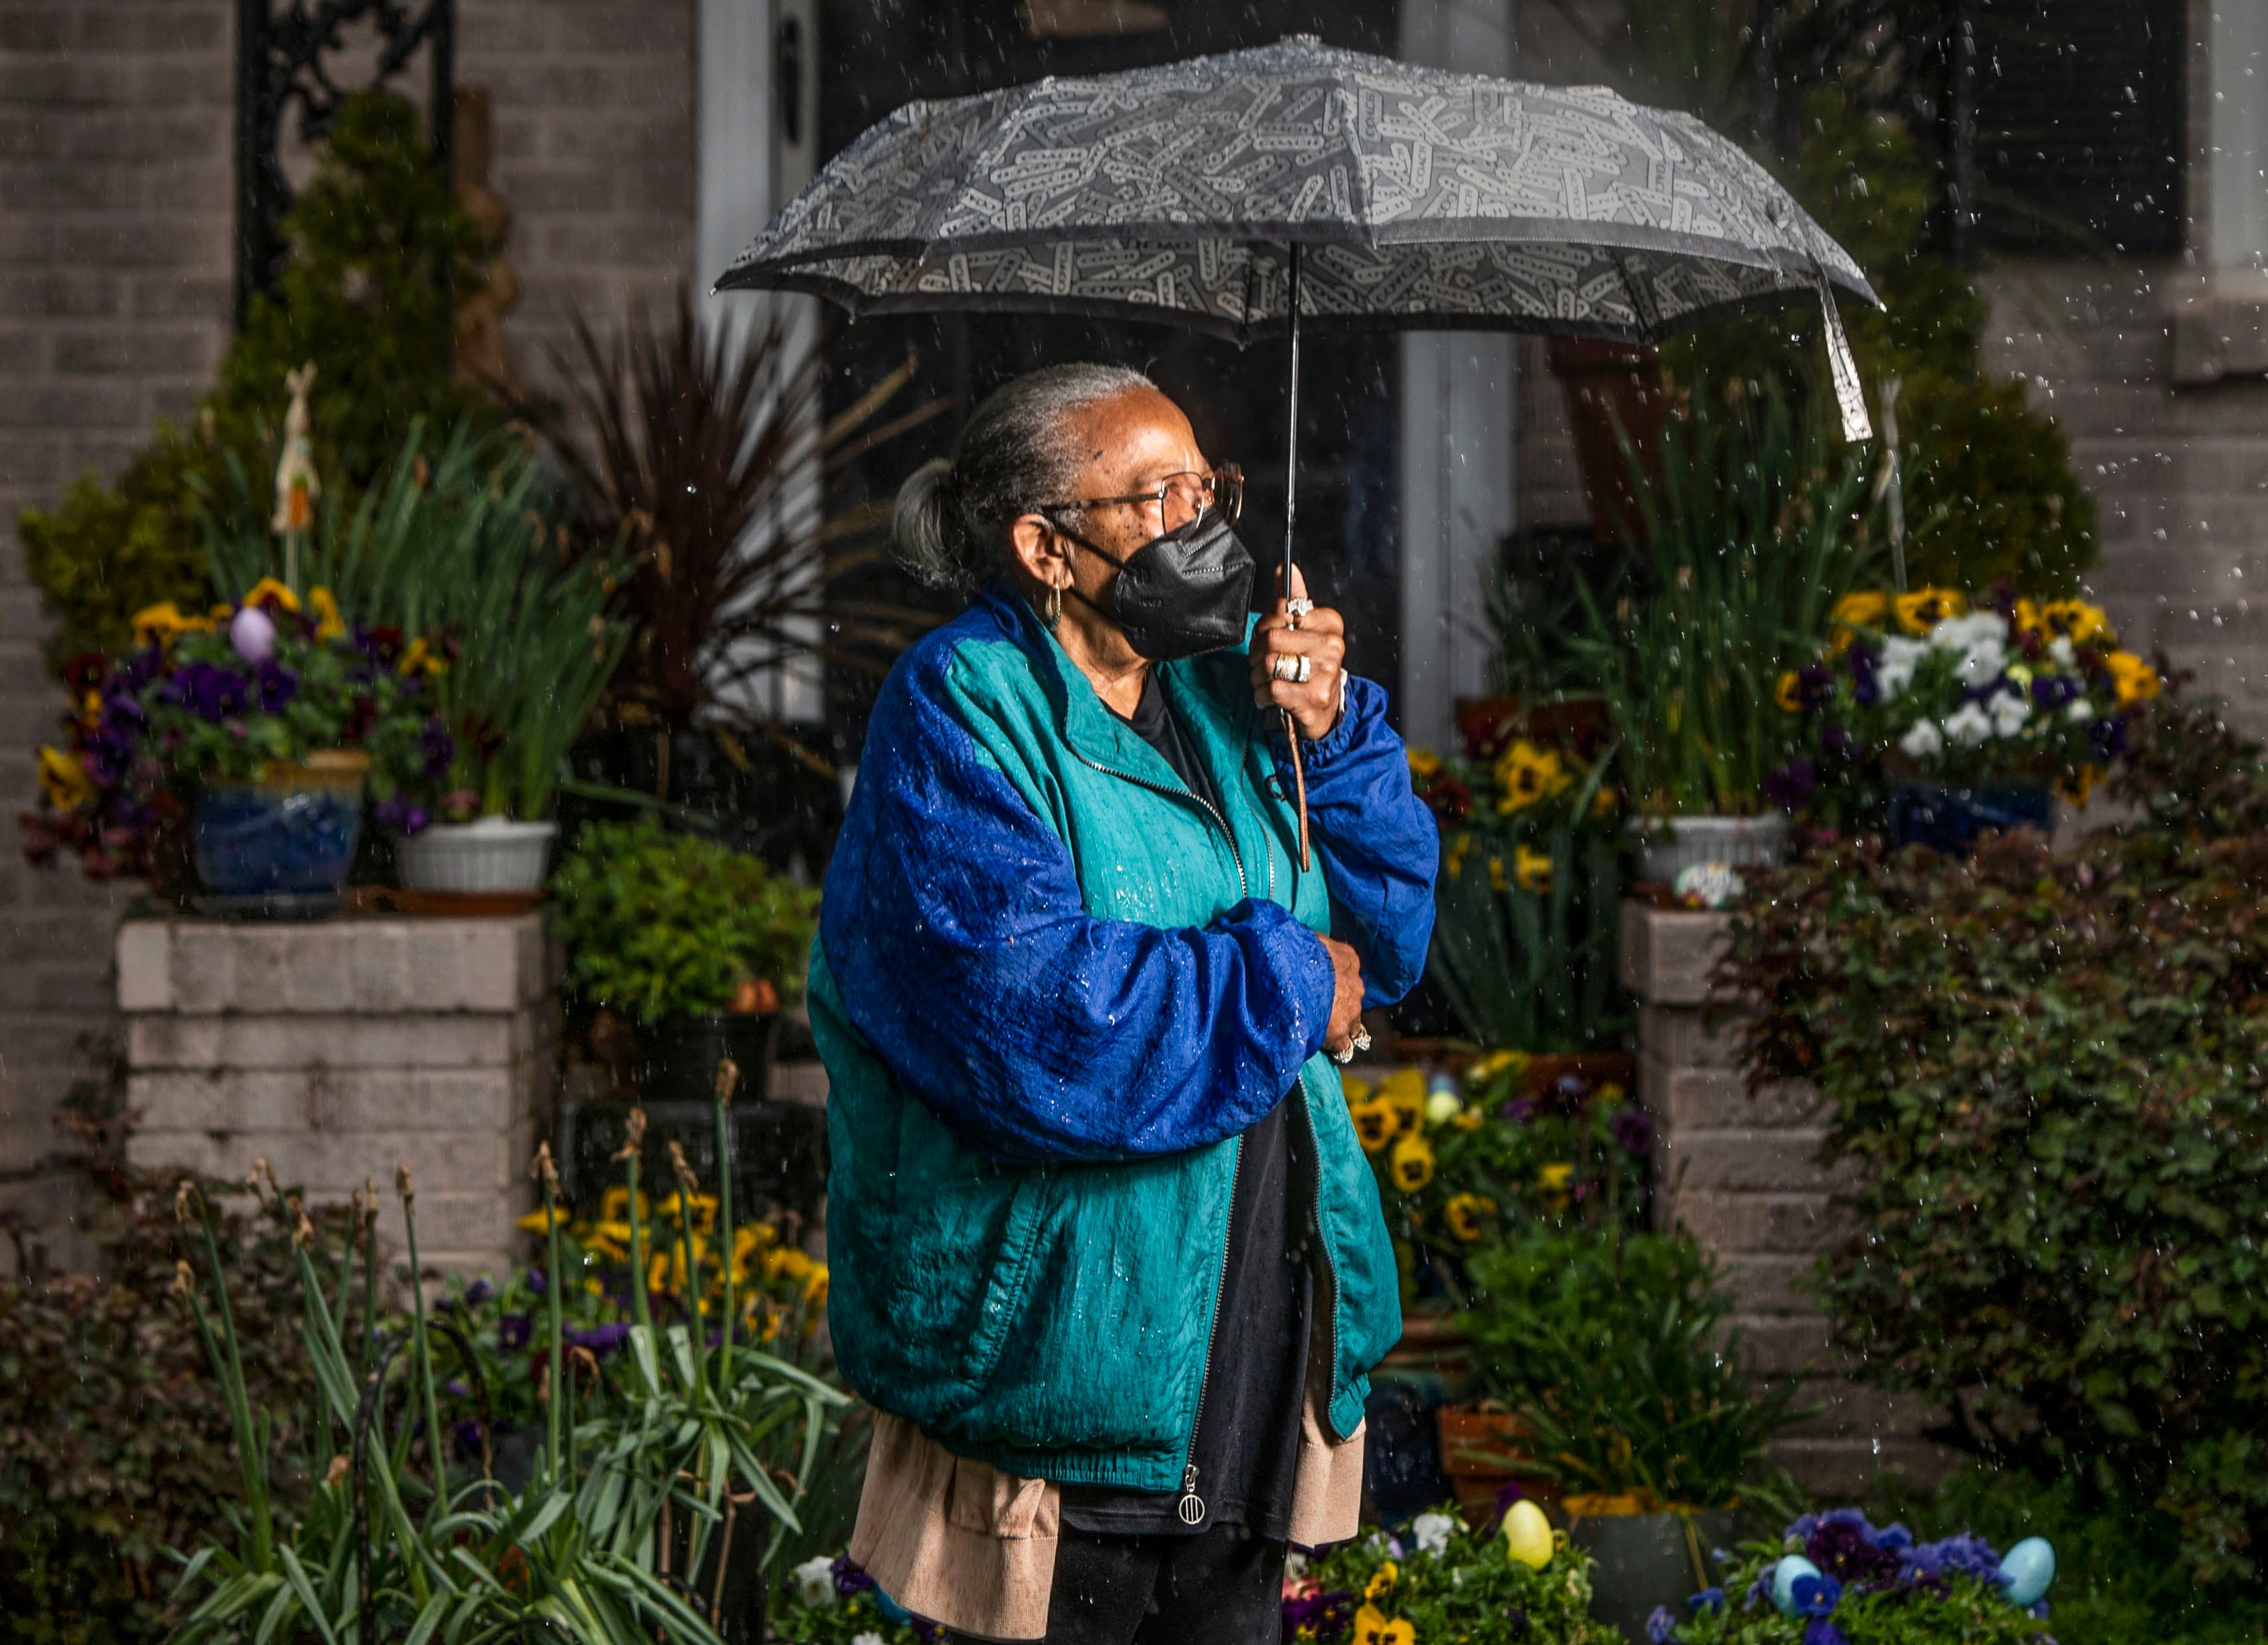 Sarah Reese poses for a portrait in the rain in front of her home in Greenville on March 23.